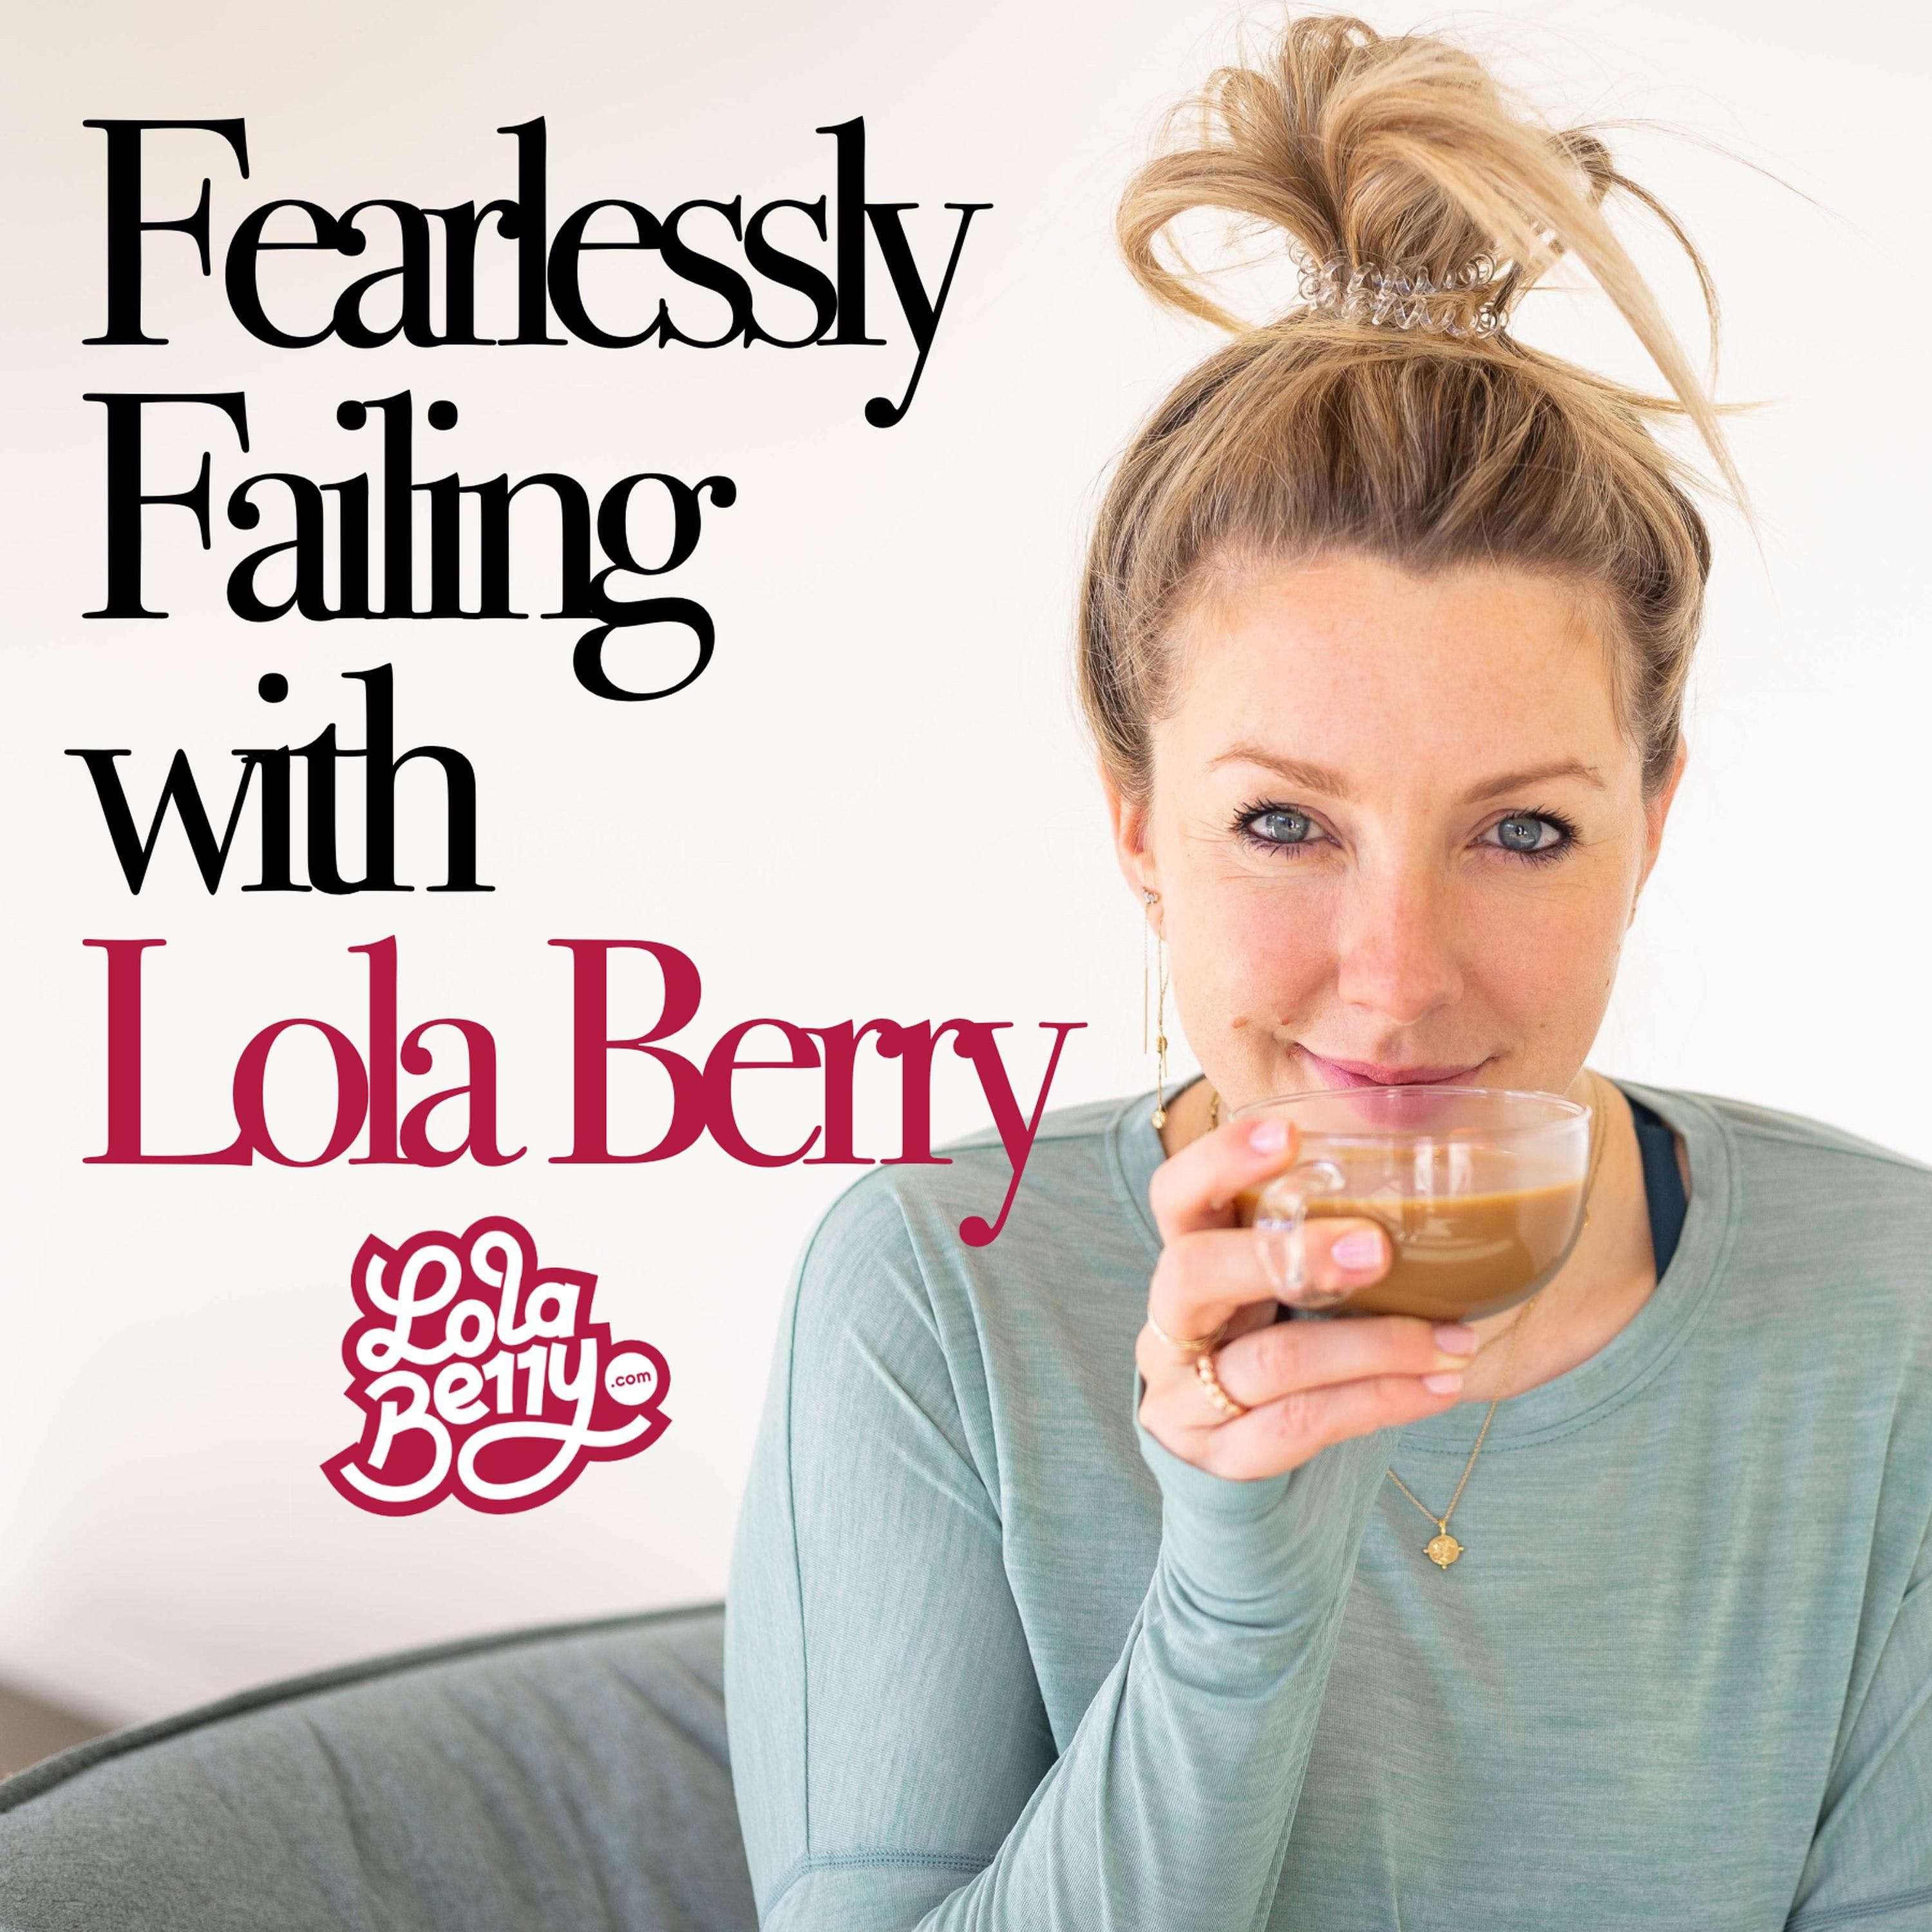 121. Fearlessly Failing: The Bad Girls Guide to Better with Casey Beros